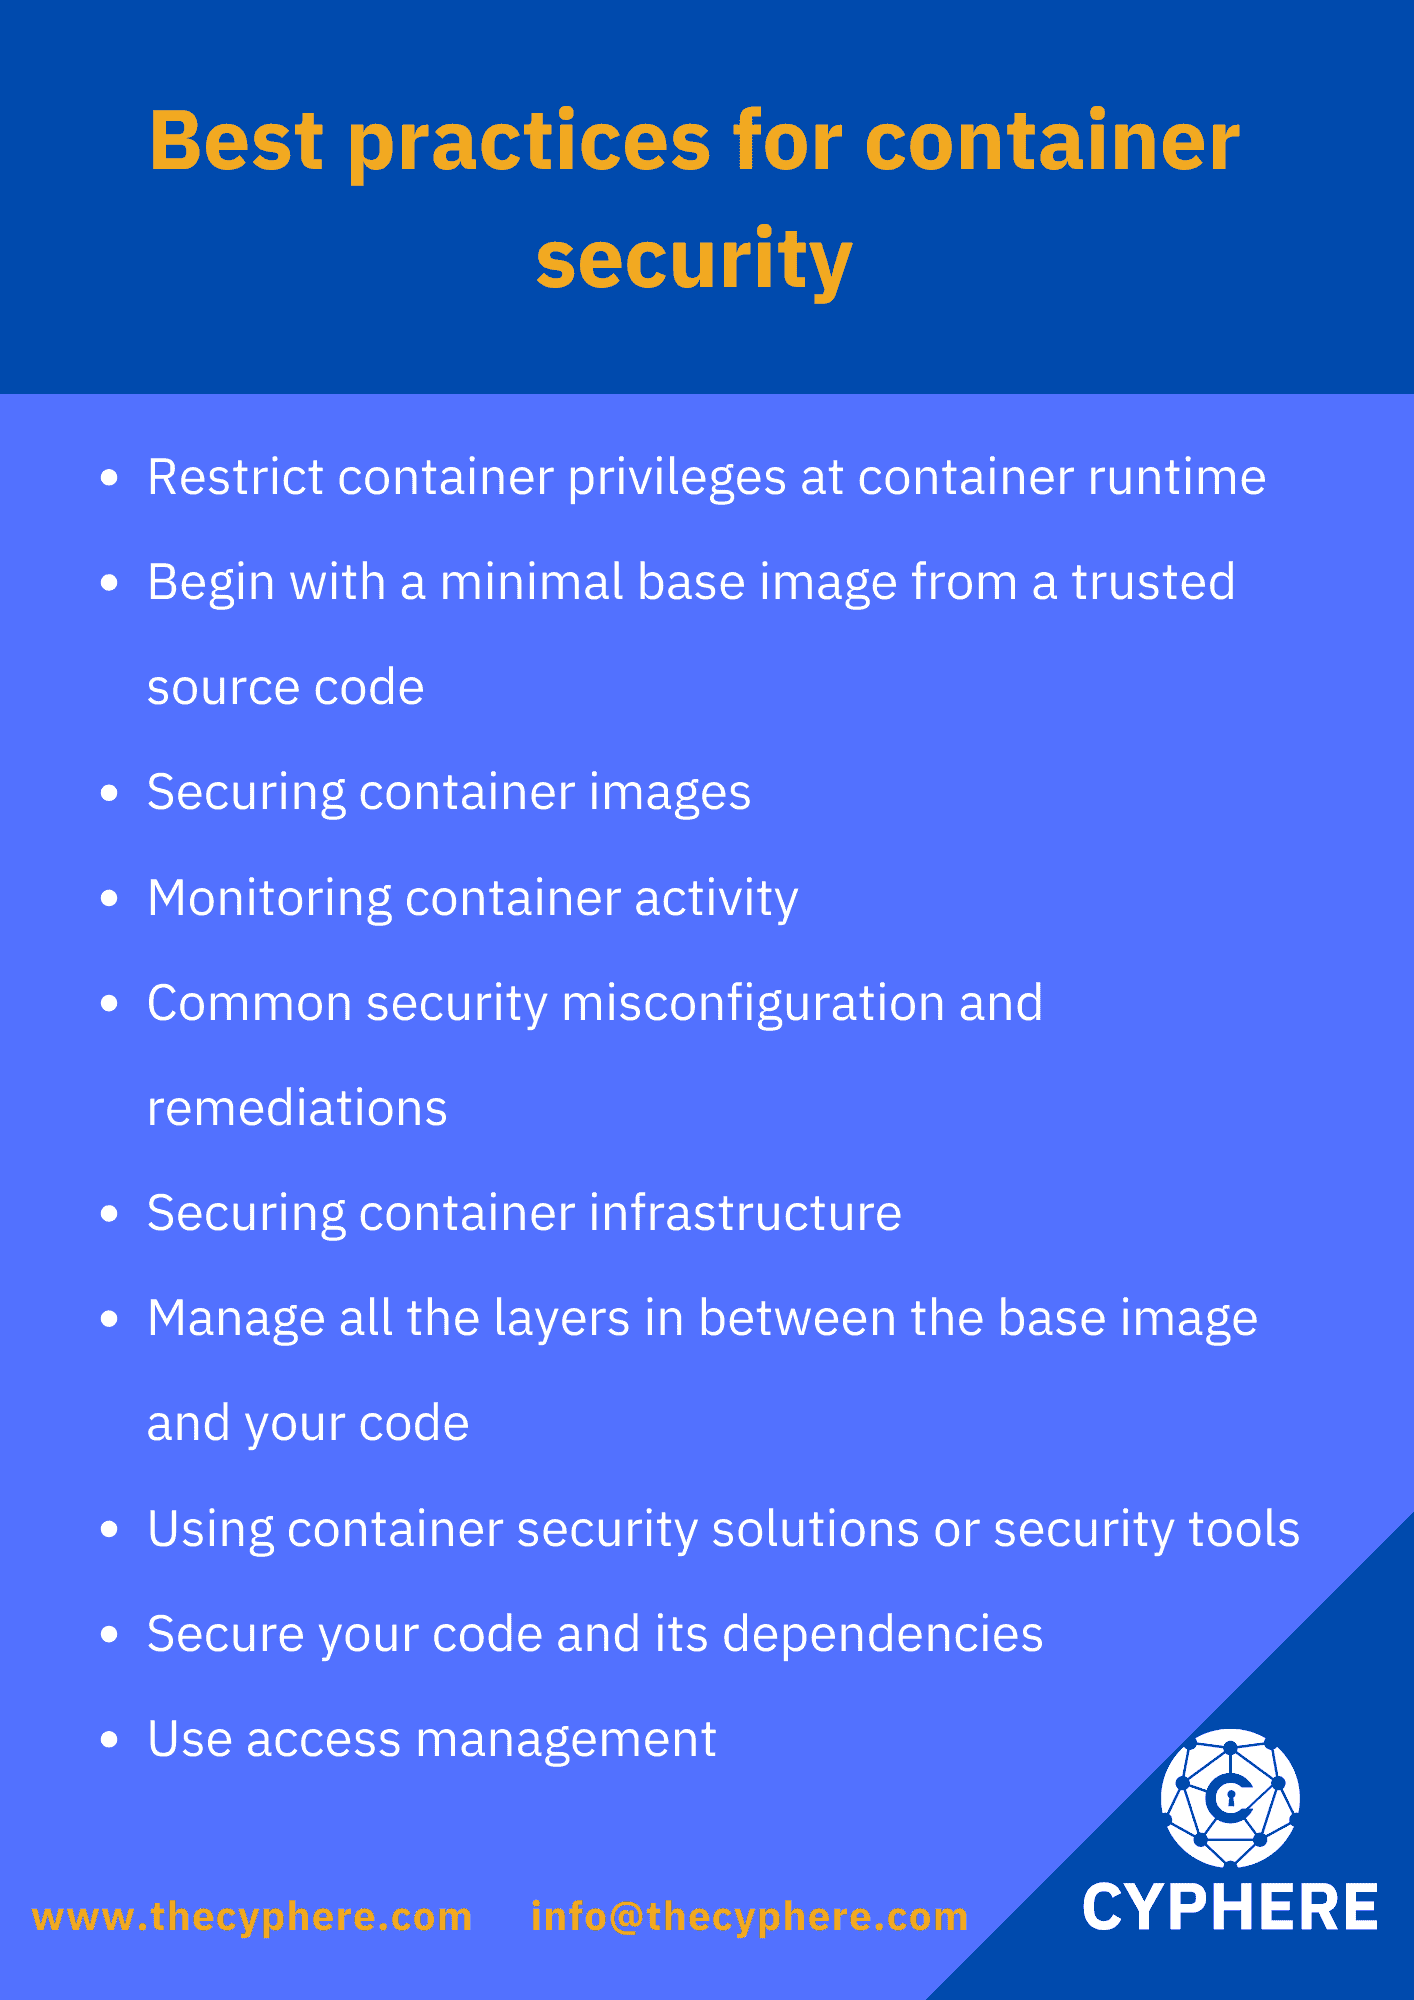 Container security best practices